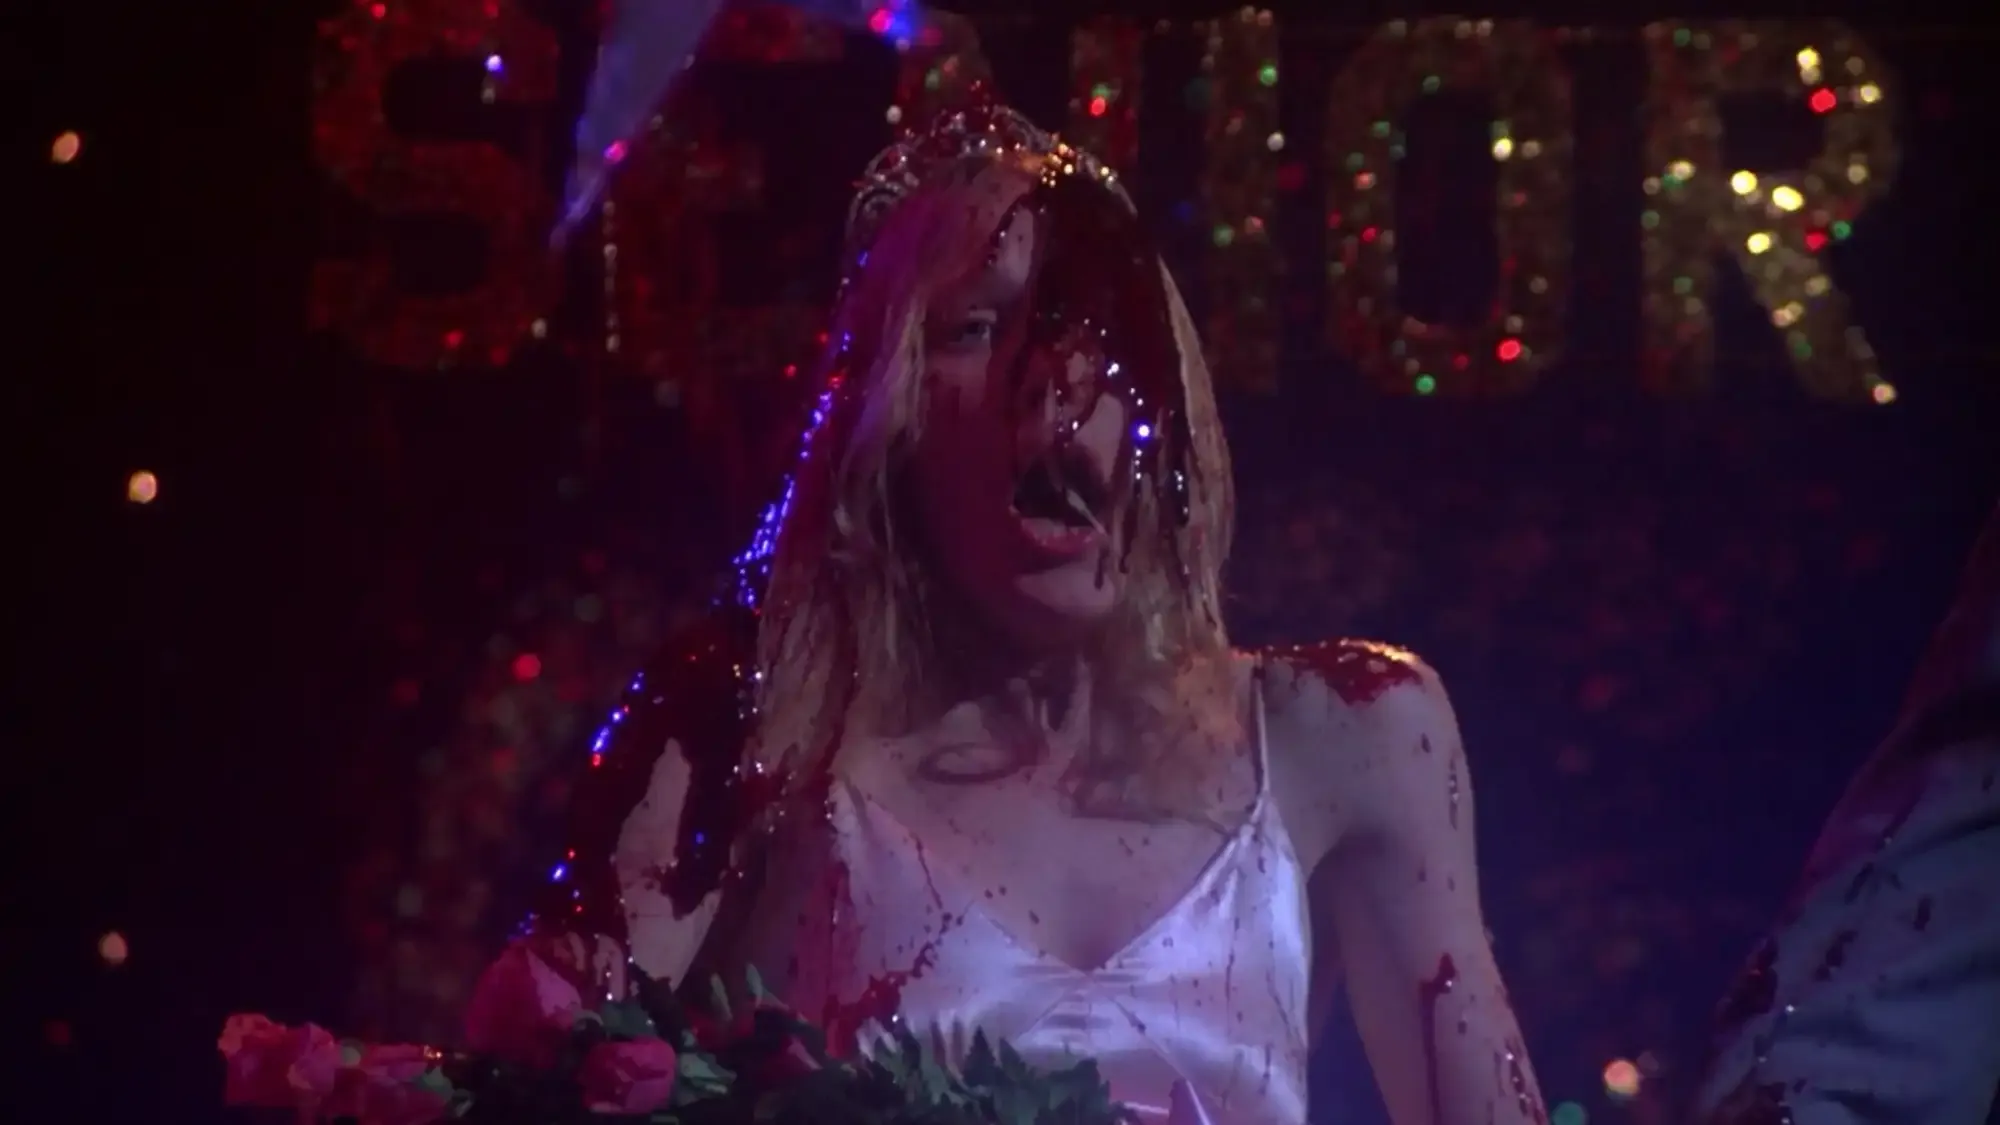 Carrie movie review